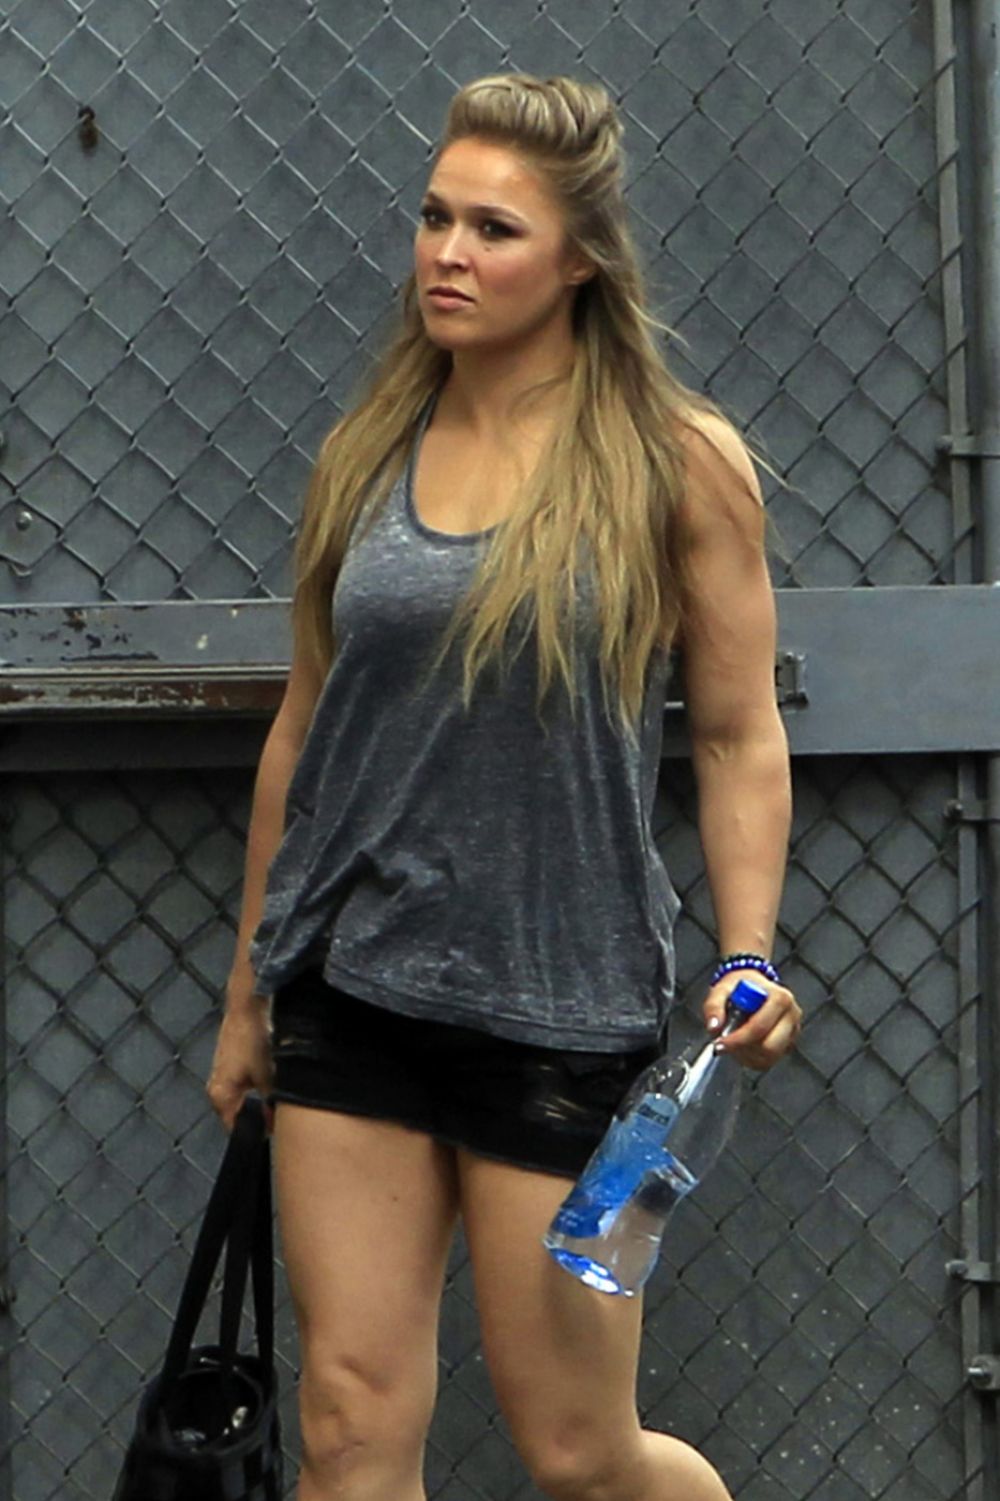 ronda-rousey-at-jimmy-kimmel-live-in-hollywood-01-07-2015_1